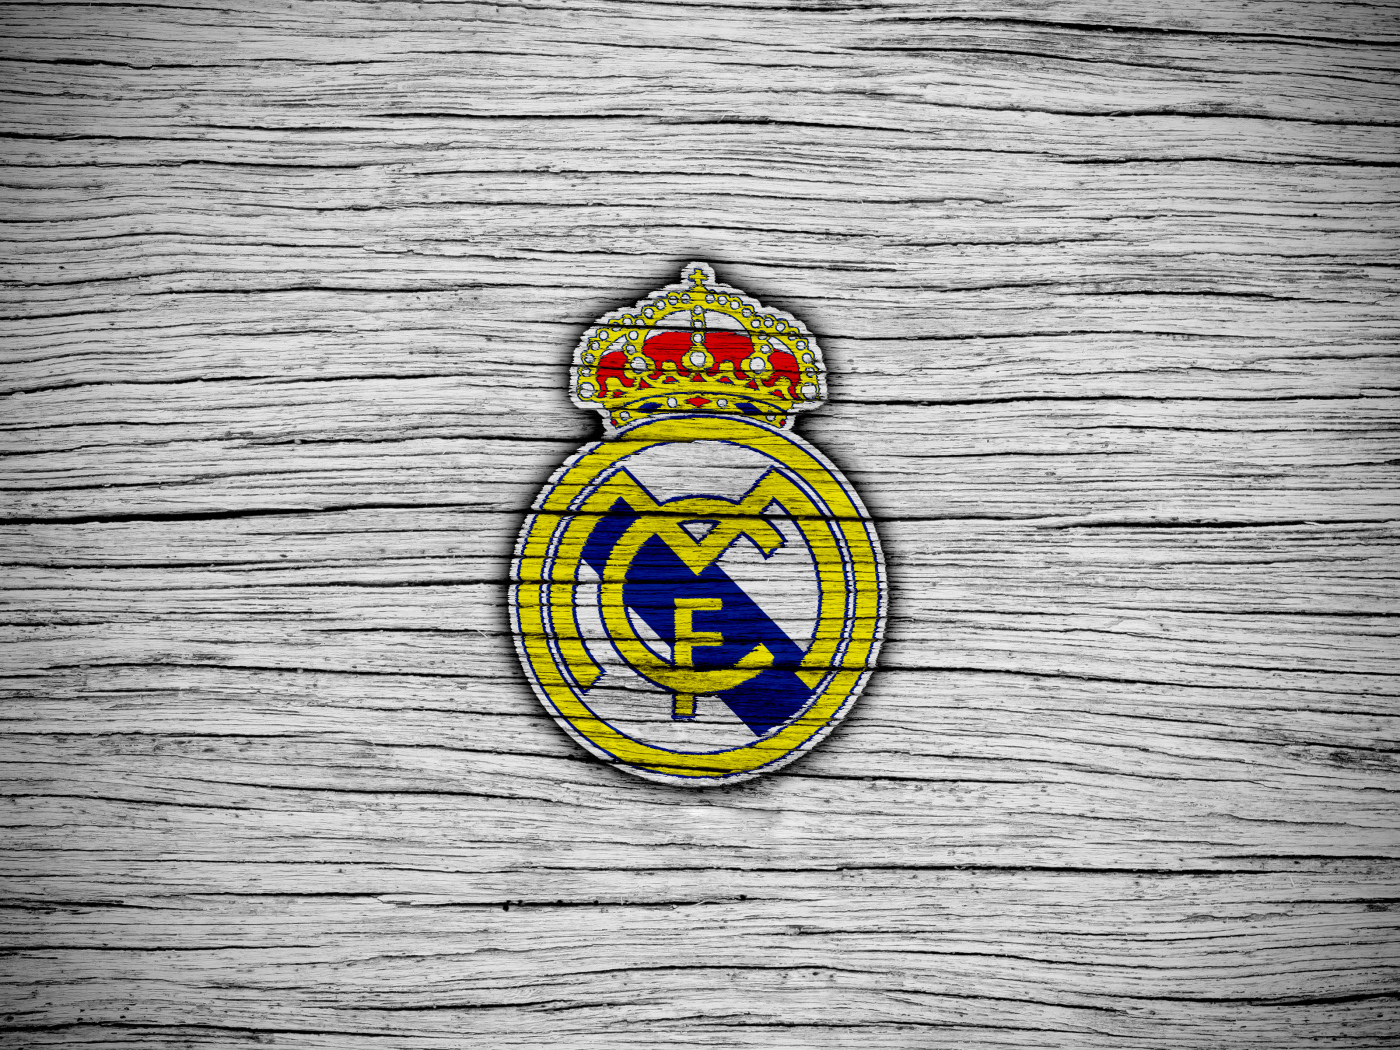 The logo of the football club Real Madrid on a gray background